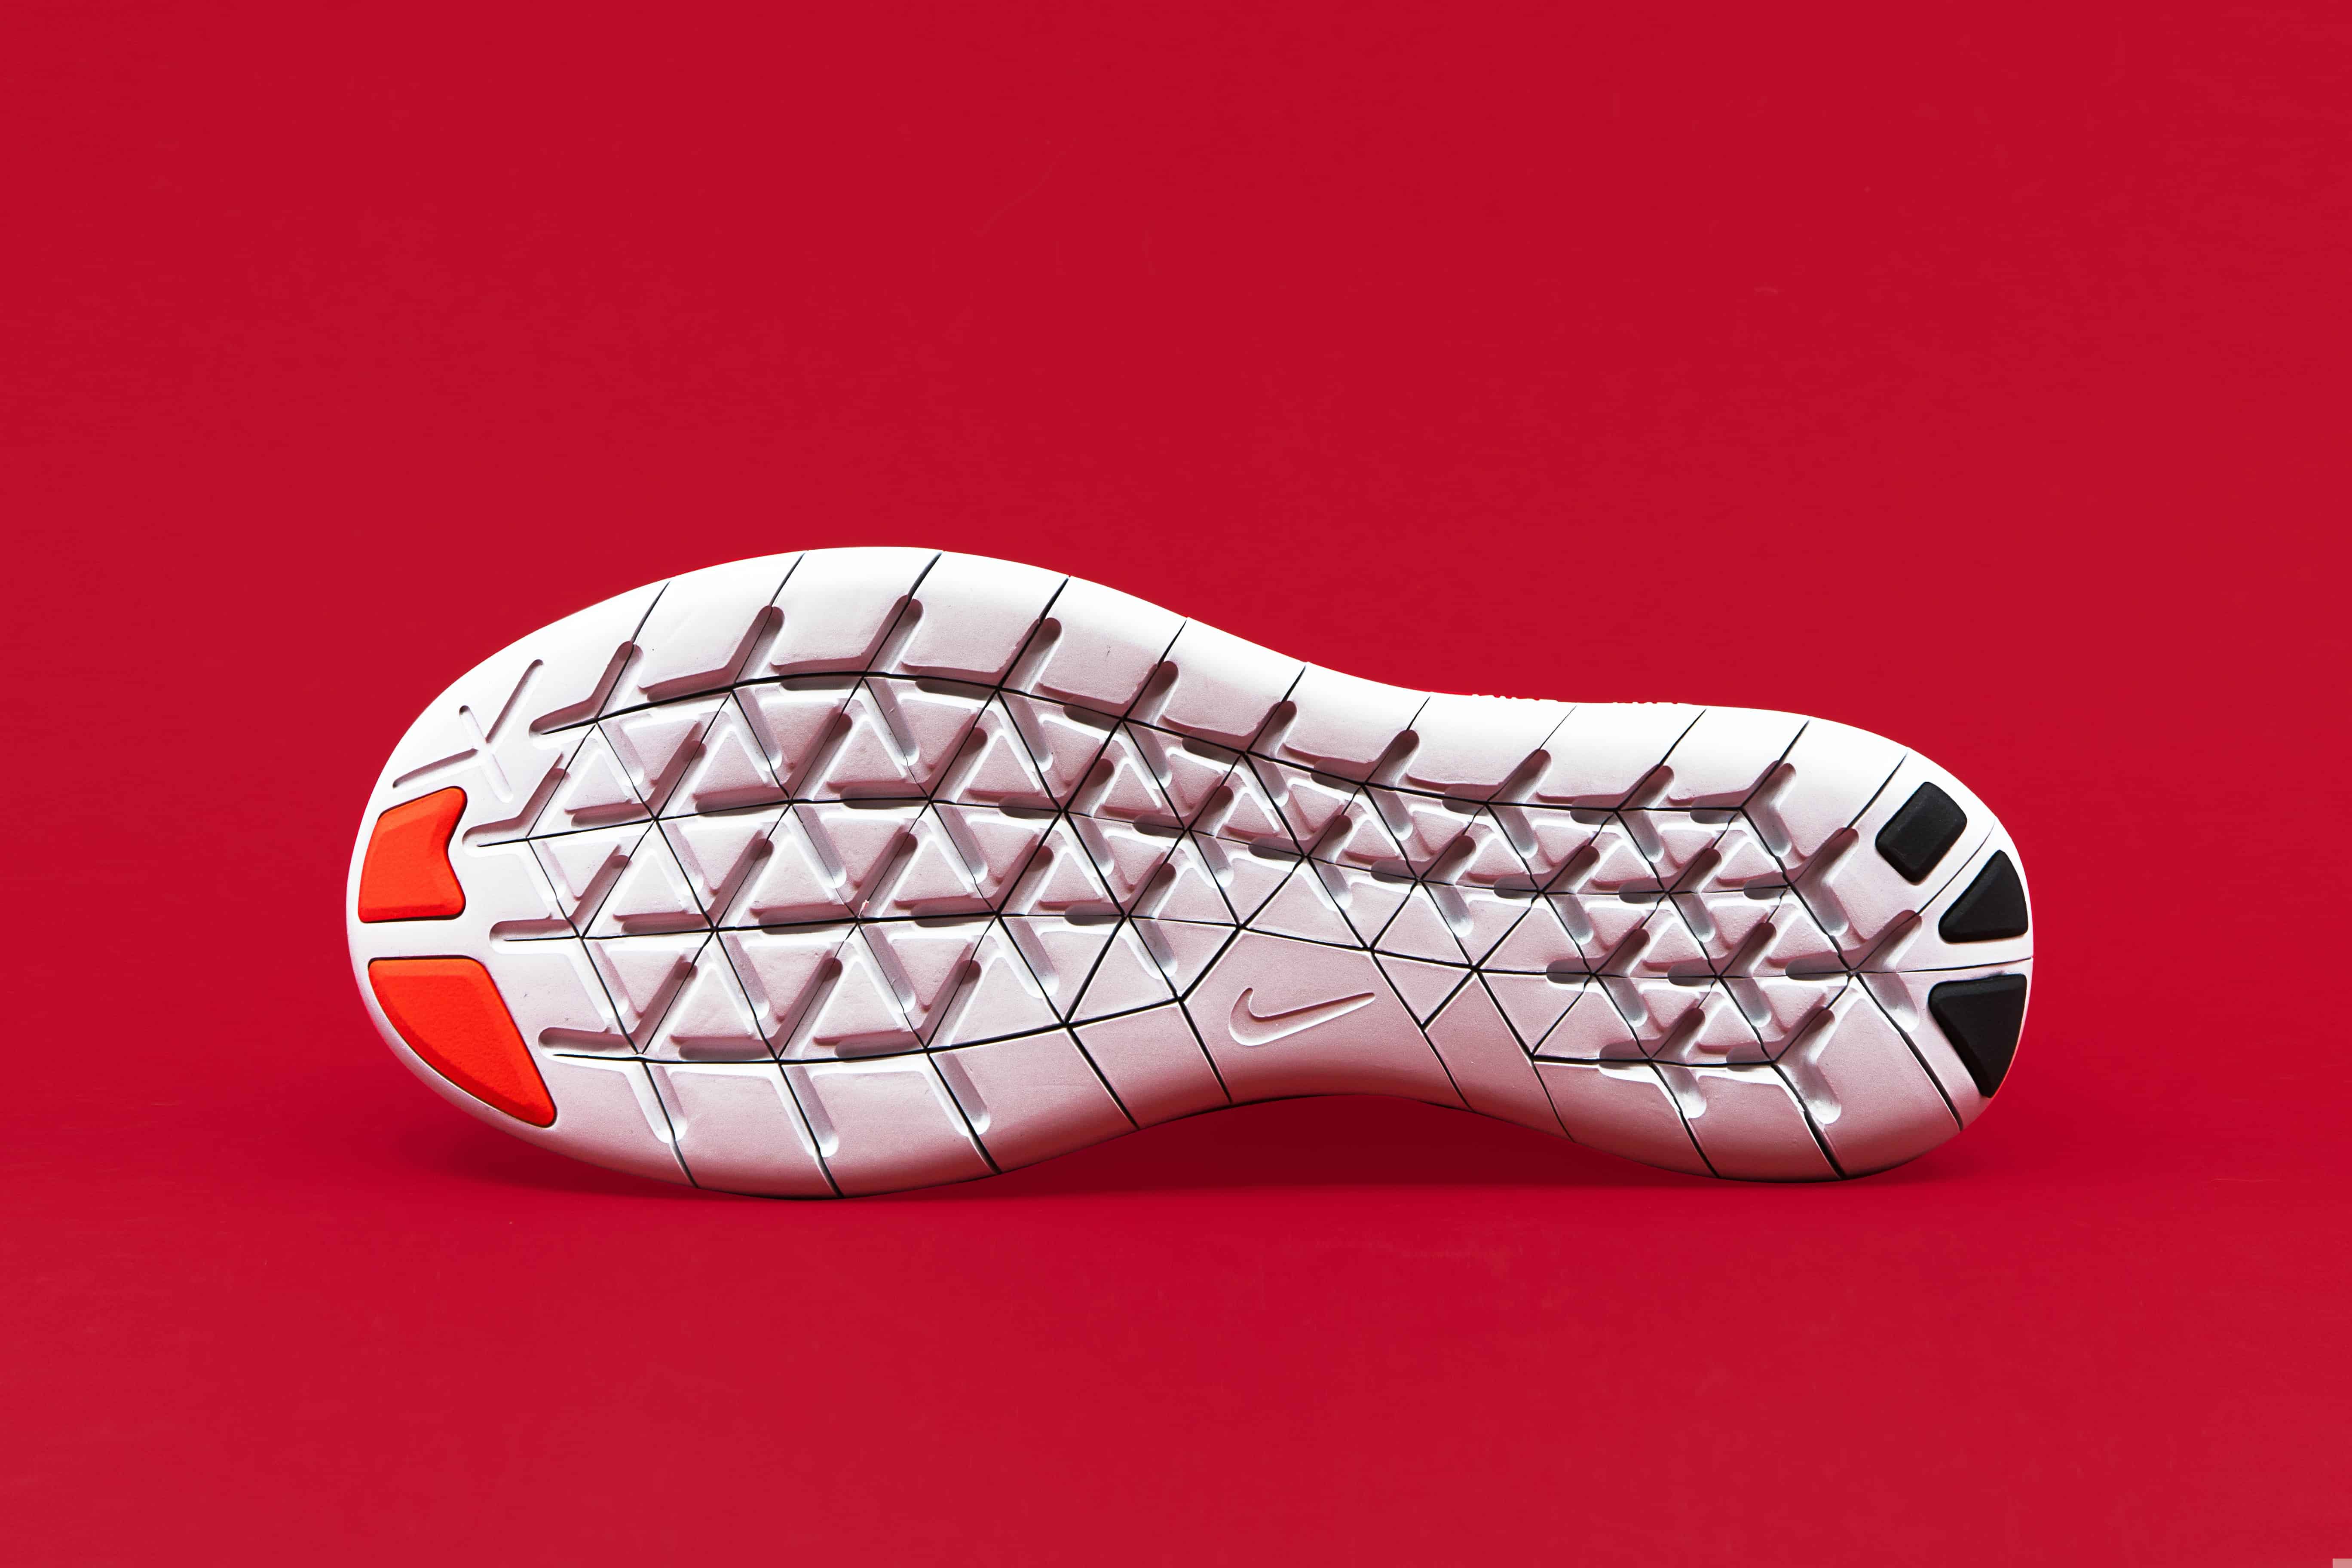 3D-printed insoles measure pressure directly in the shoe